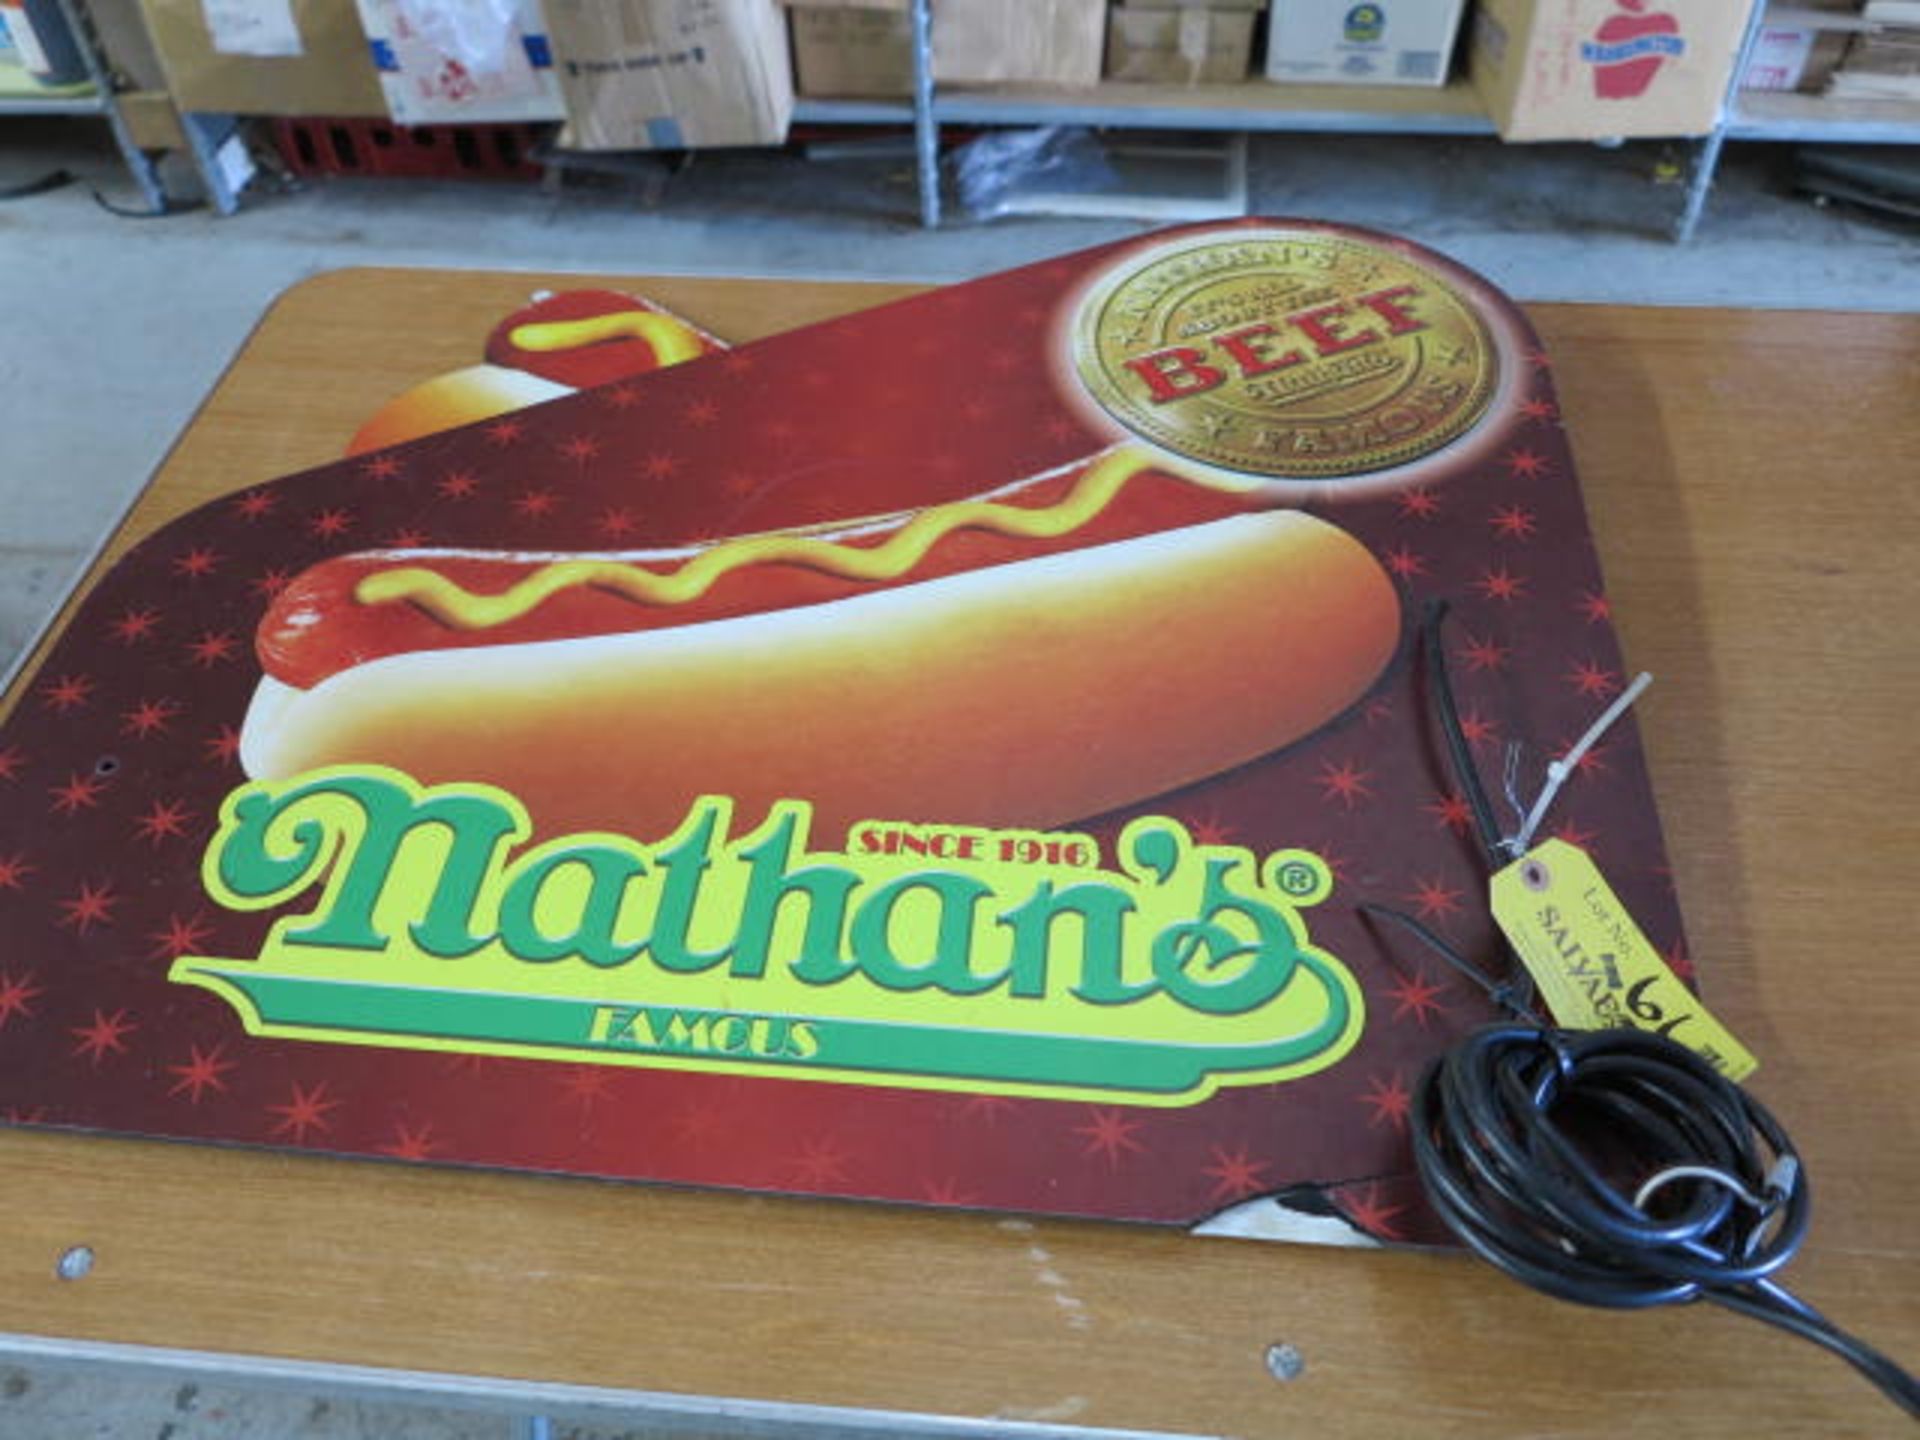 Nathans Beef Sign